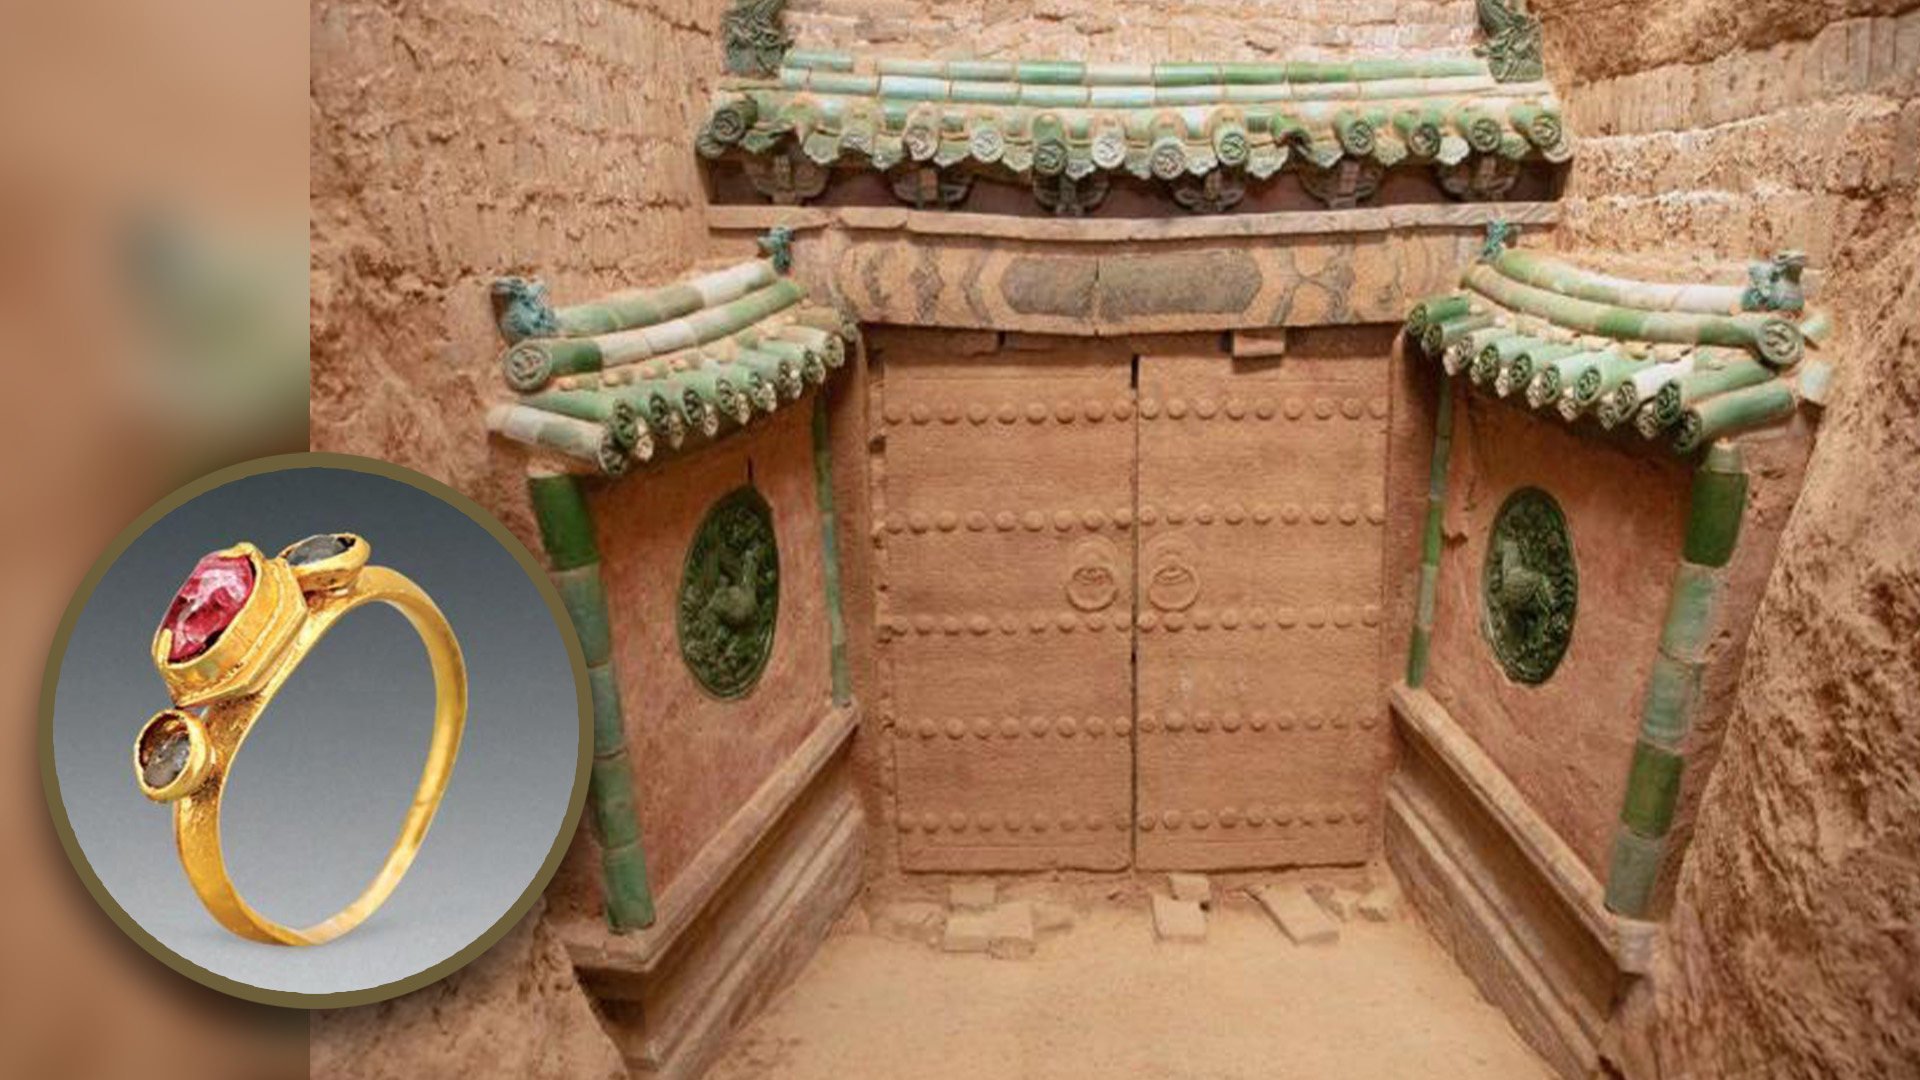 Recent archaeological discoveries in China provide valuable insights into the lifestyle of a prince from the Ming dynasty as well as shedding light on royal burial customs and attire. Photo: SCMP composite/chinanews.com